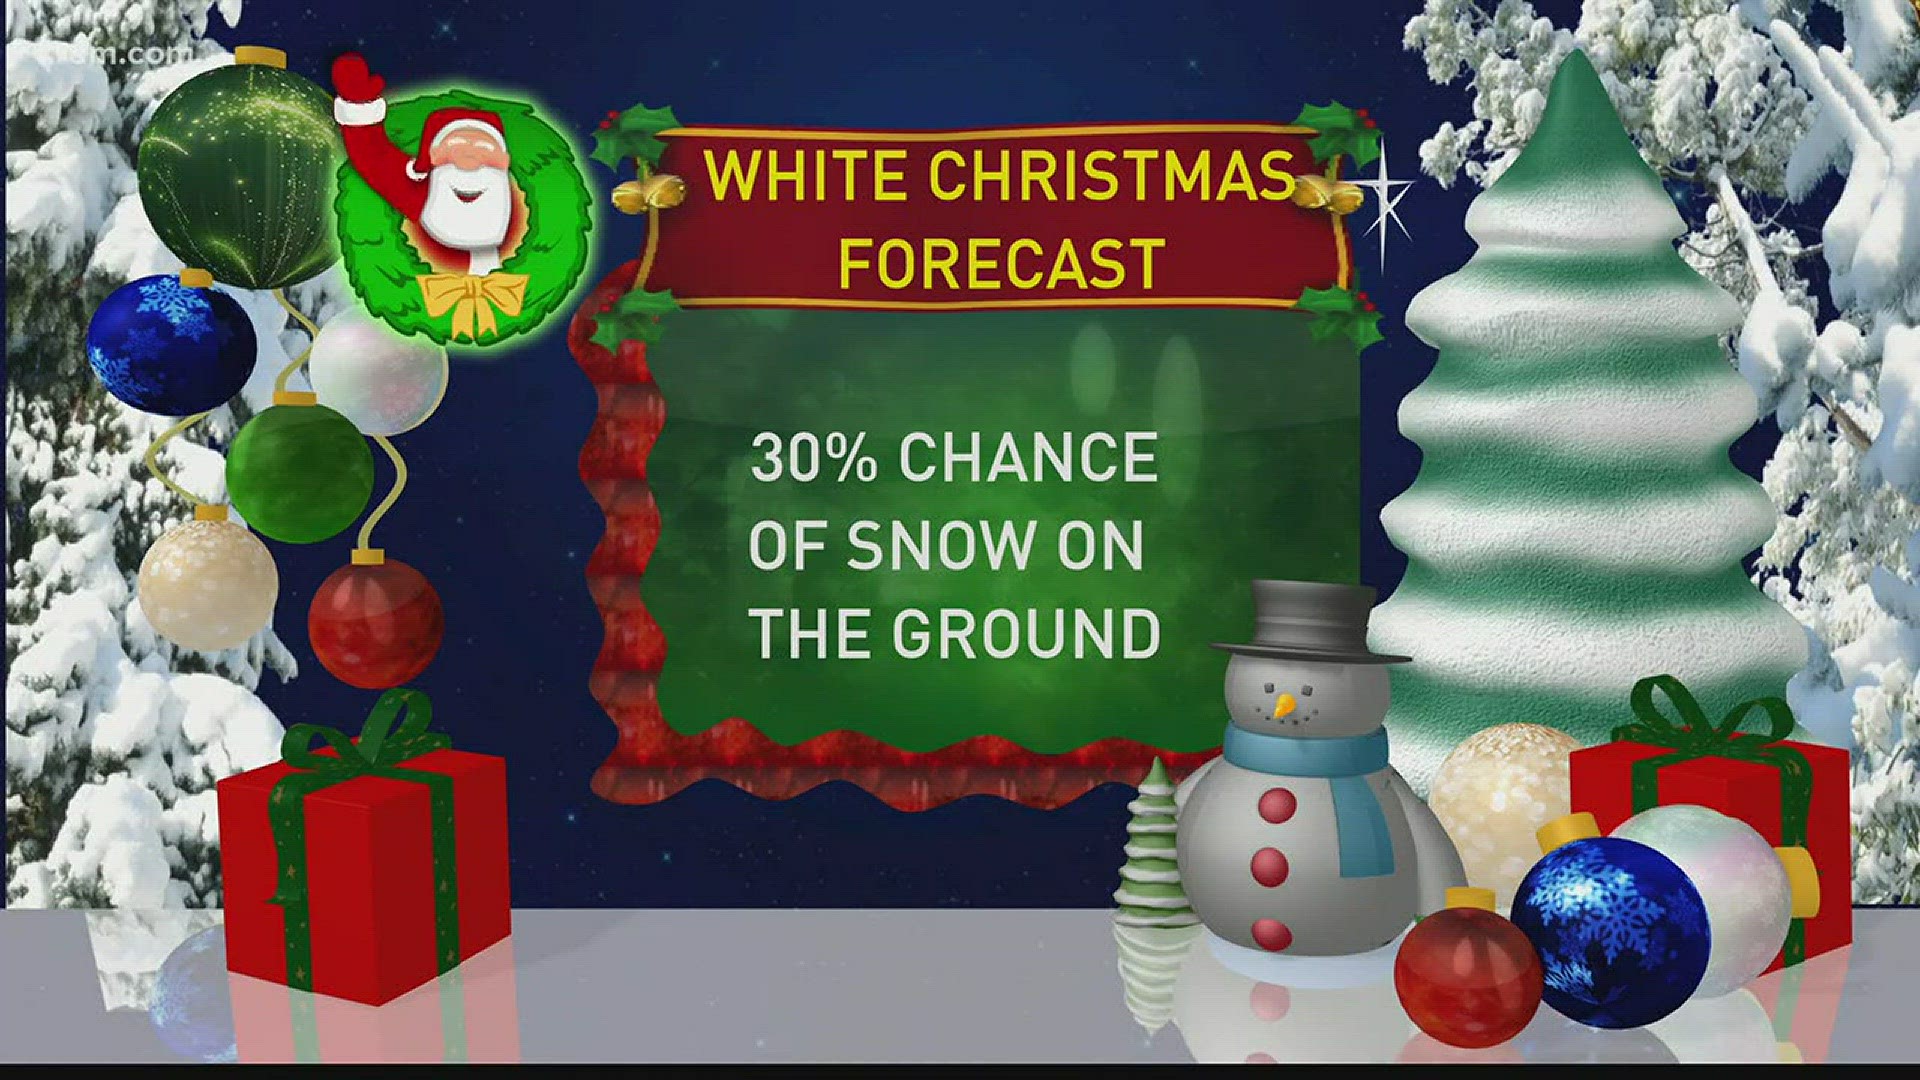 KREM 2's Briana Bermensolo takes a look at the chance of a white Christmas in the INW.